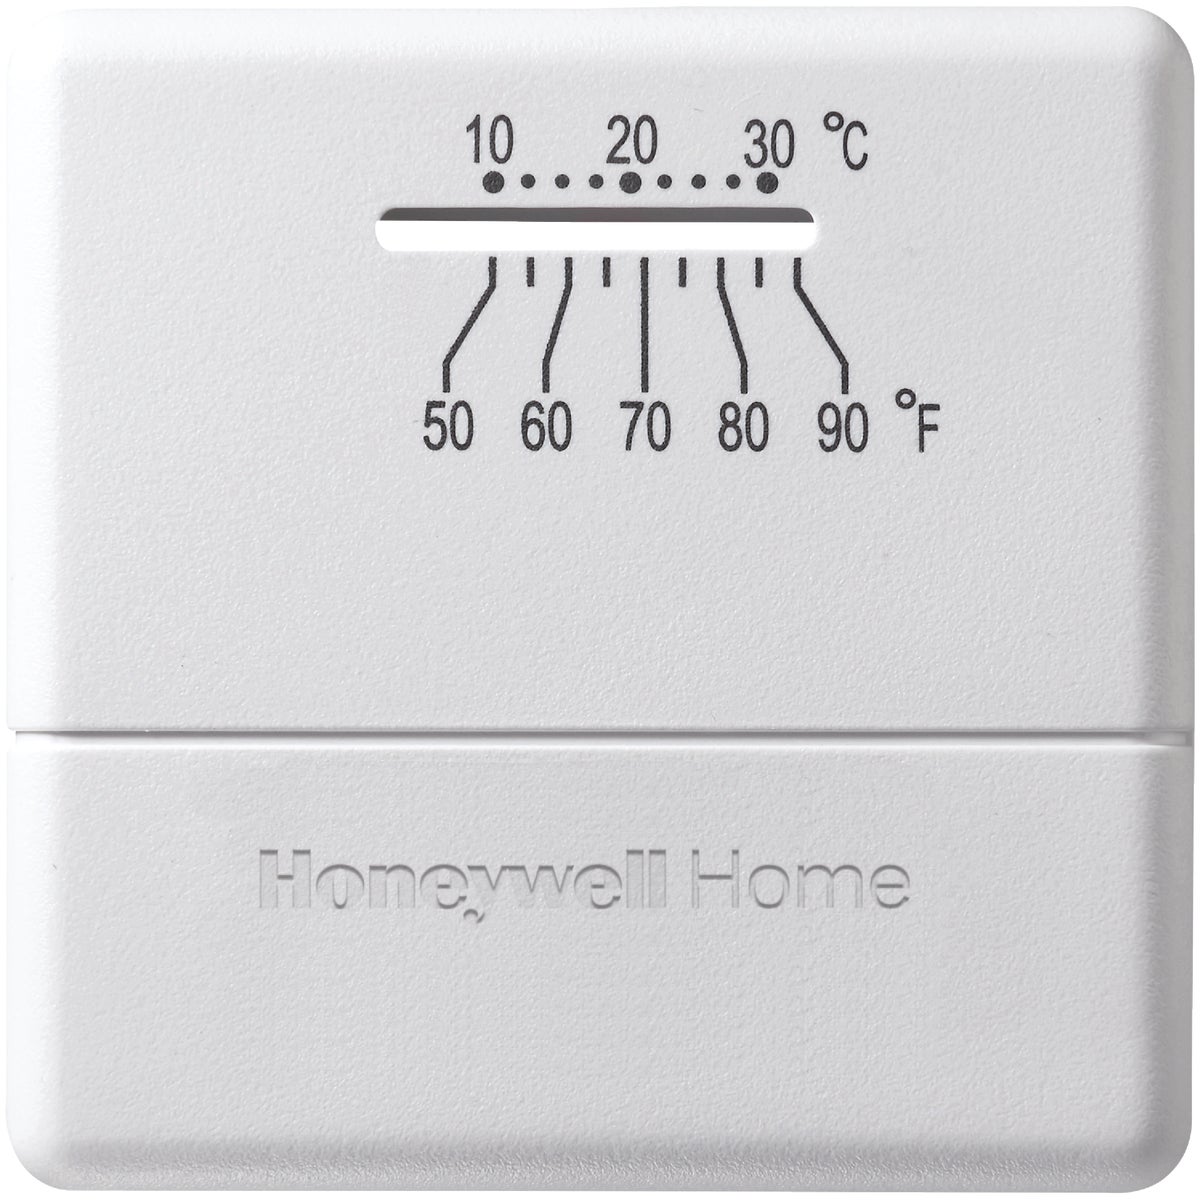 Honeywell Home Heat Only Mechanical Thermostat